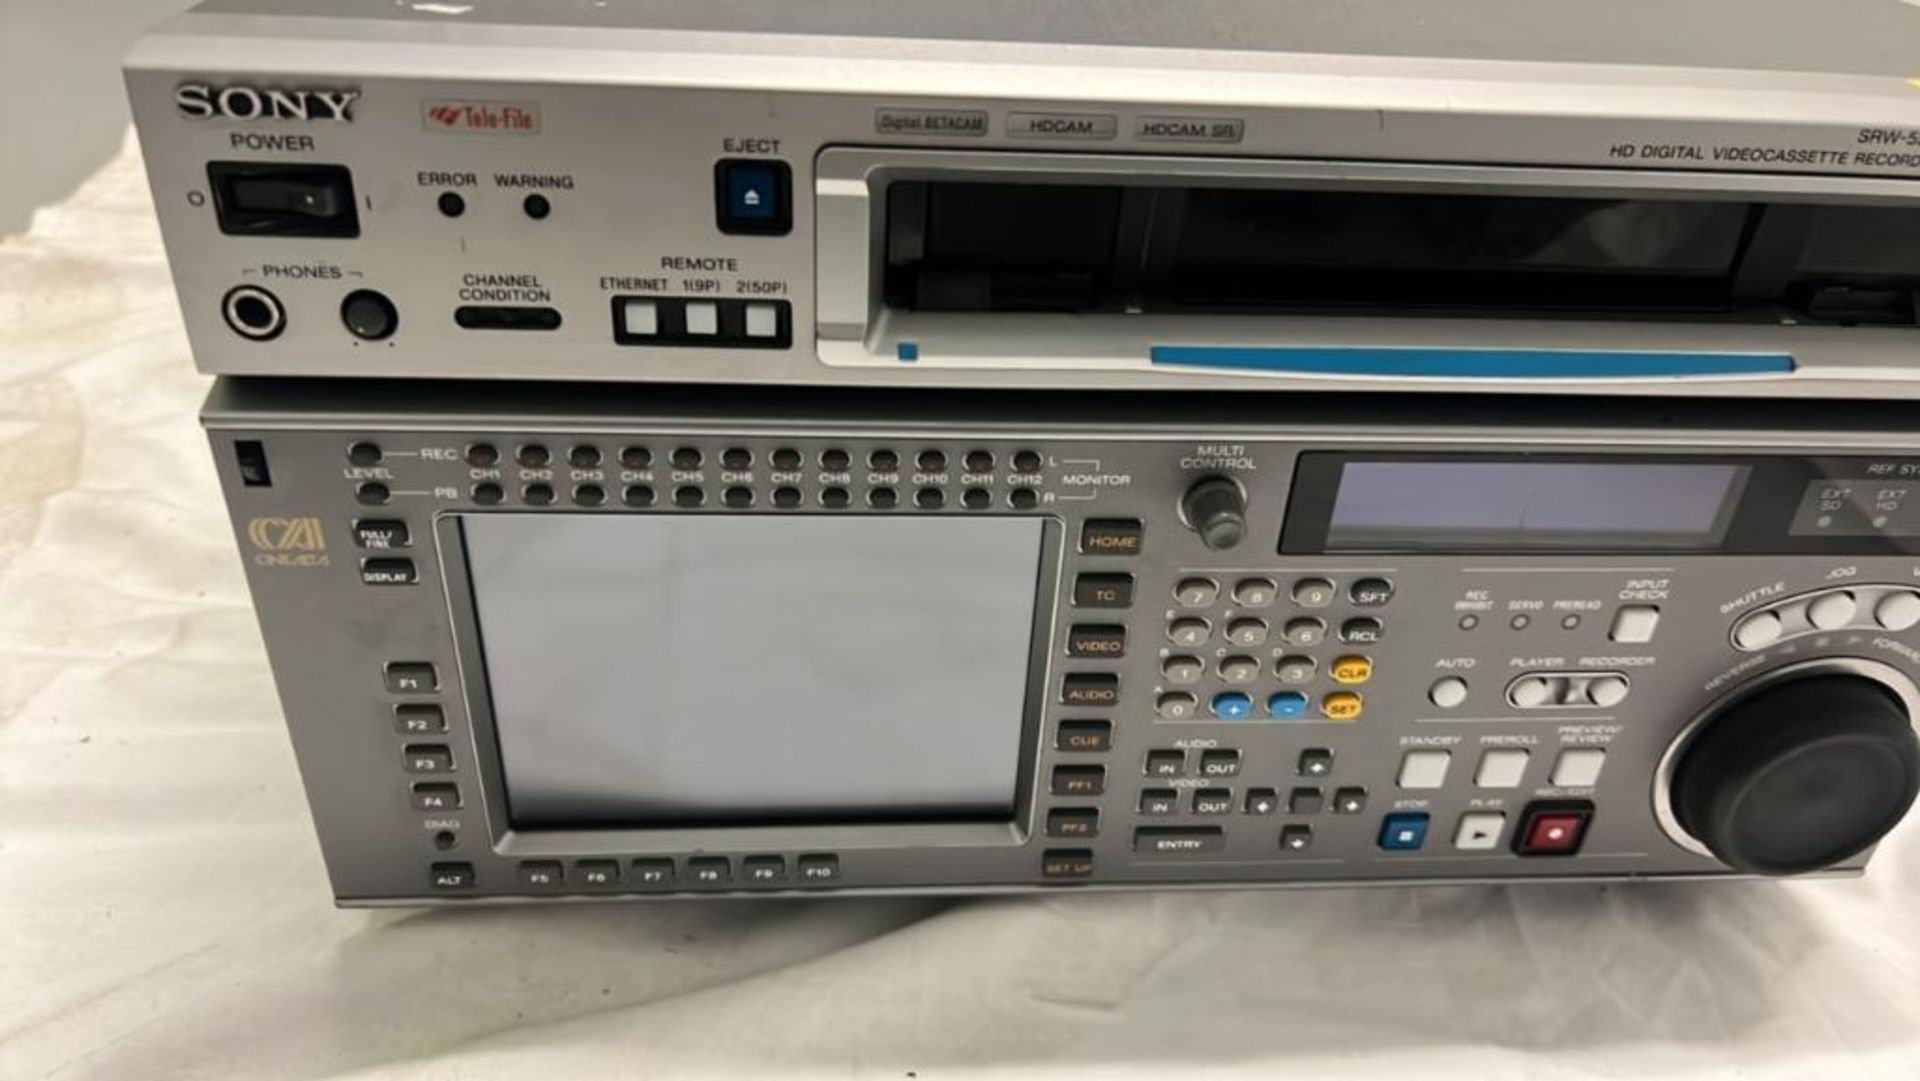 Sony SRW-550 Digital Videocassette recorder with flight case SN: 14618 - Image 2 of 6